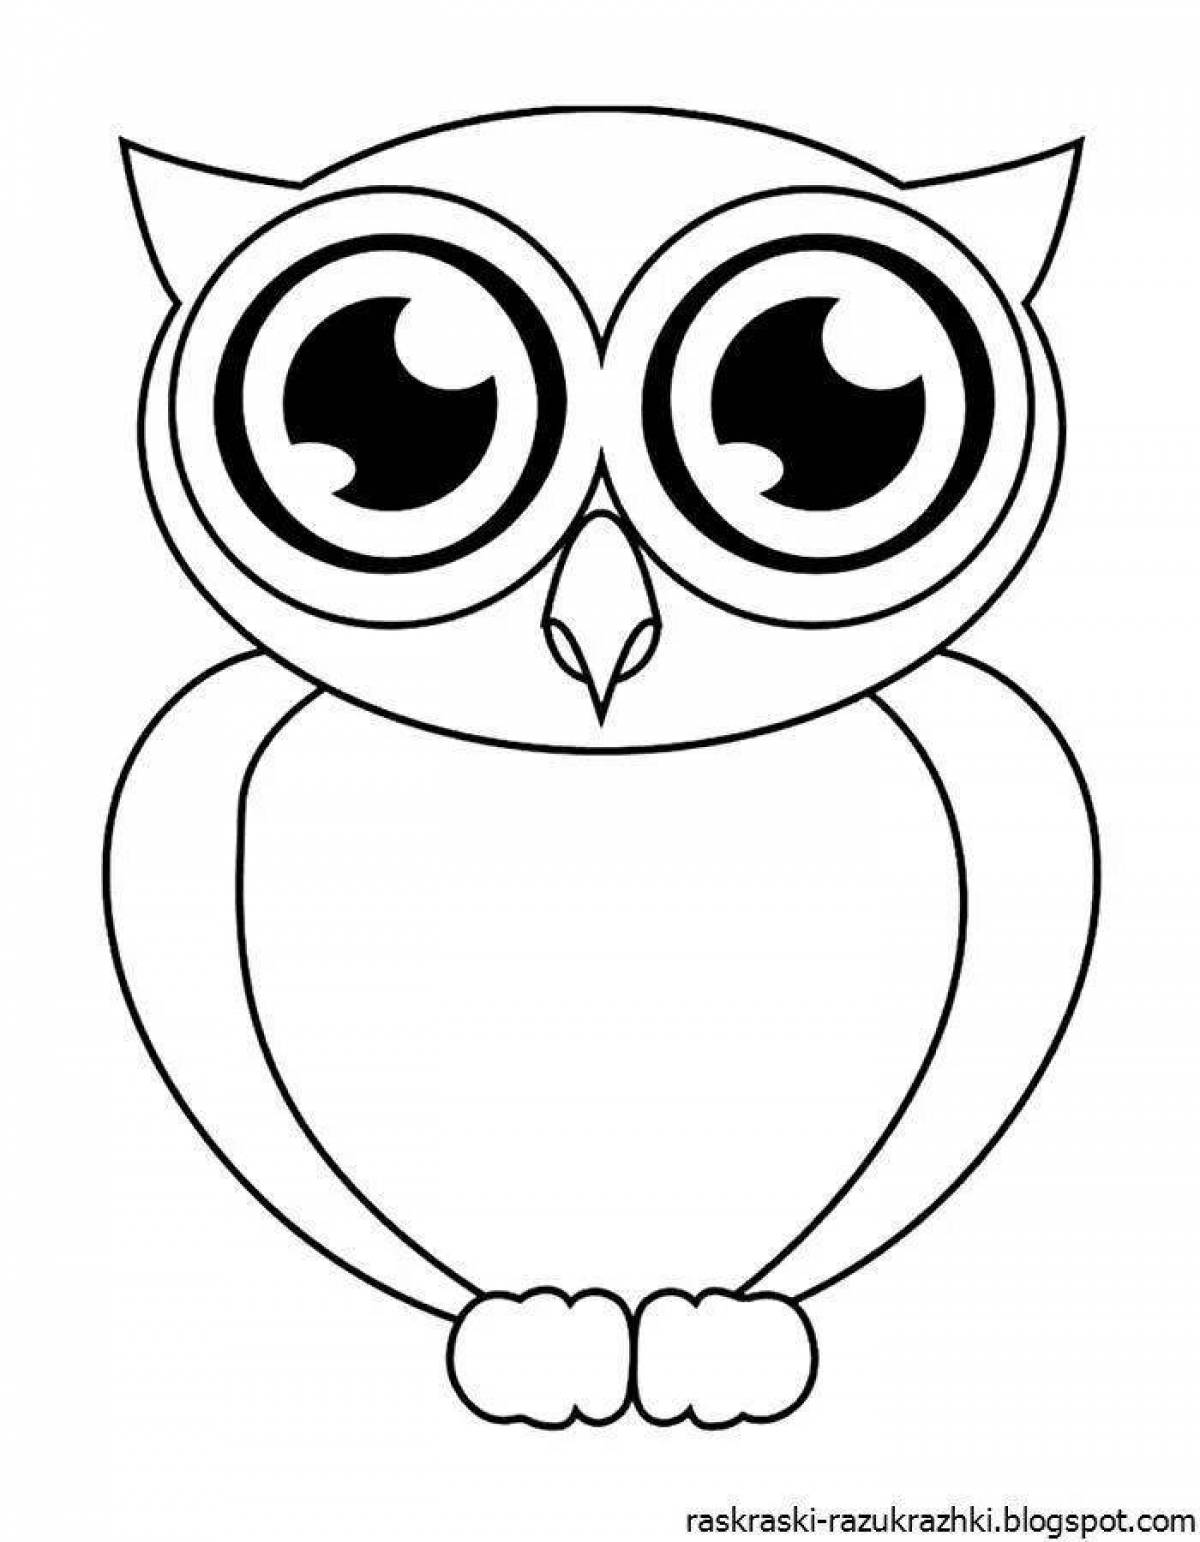 Incredible owl coloring book for kids